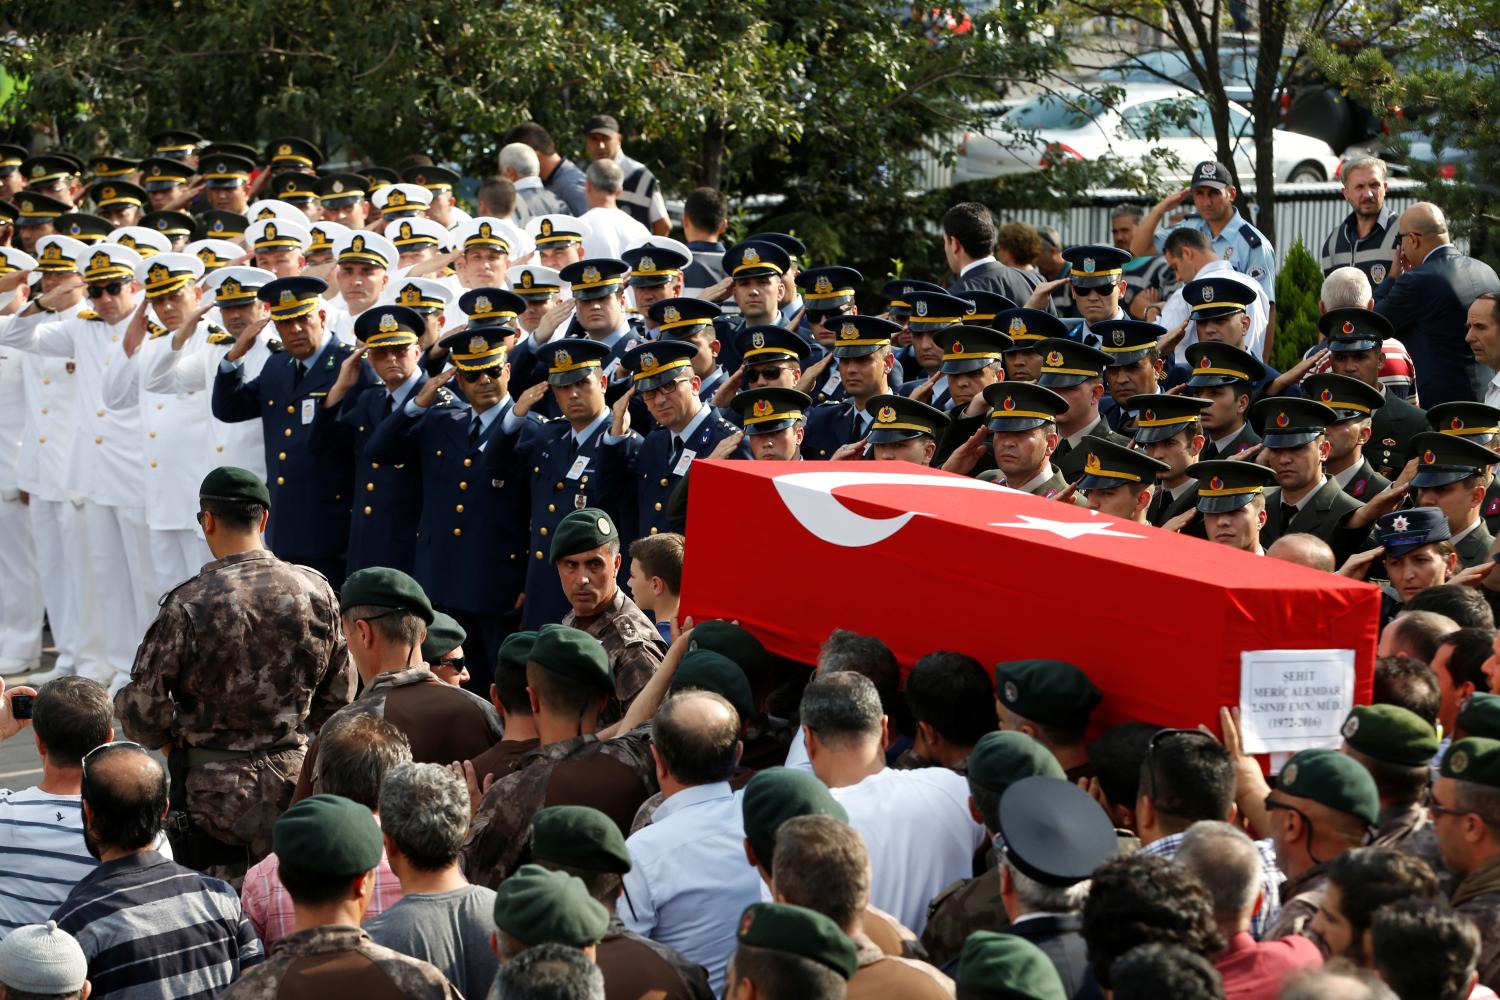 Turkish special force police officers carry the coffin of police chief Meric Alemdar, who was killed in the thwarted coup, during his funeral in Ankara, Turkey, July 21, 2016. REUTERS/Baz Ratner - RTSJ24Y